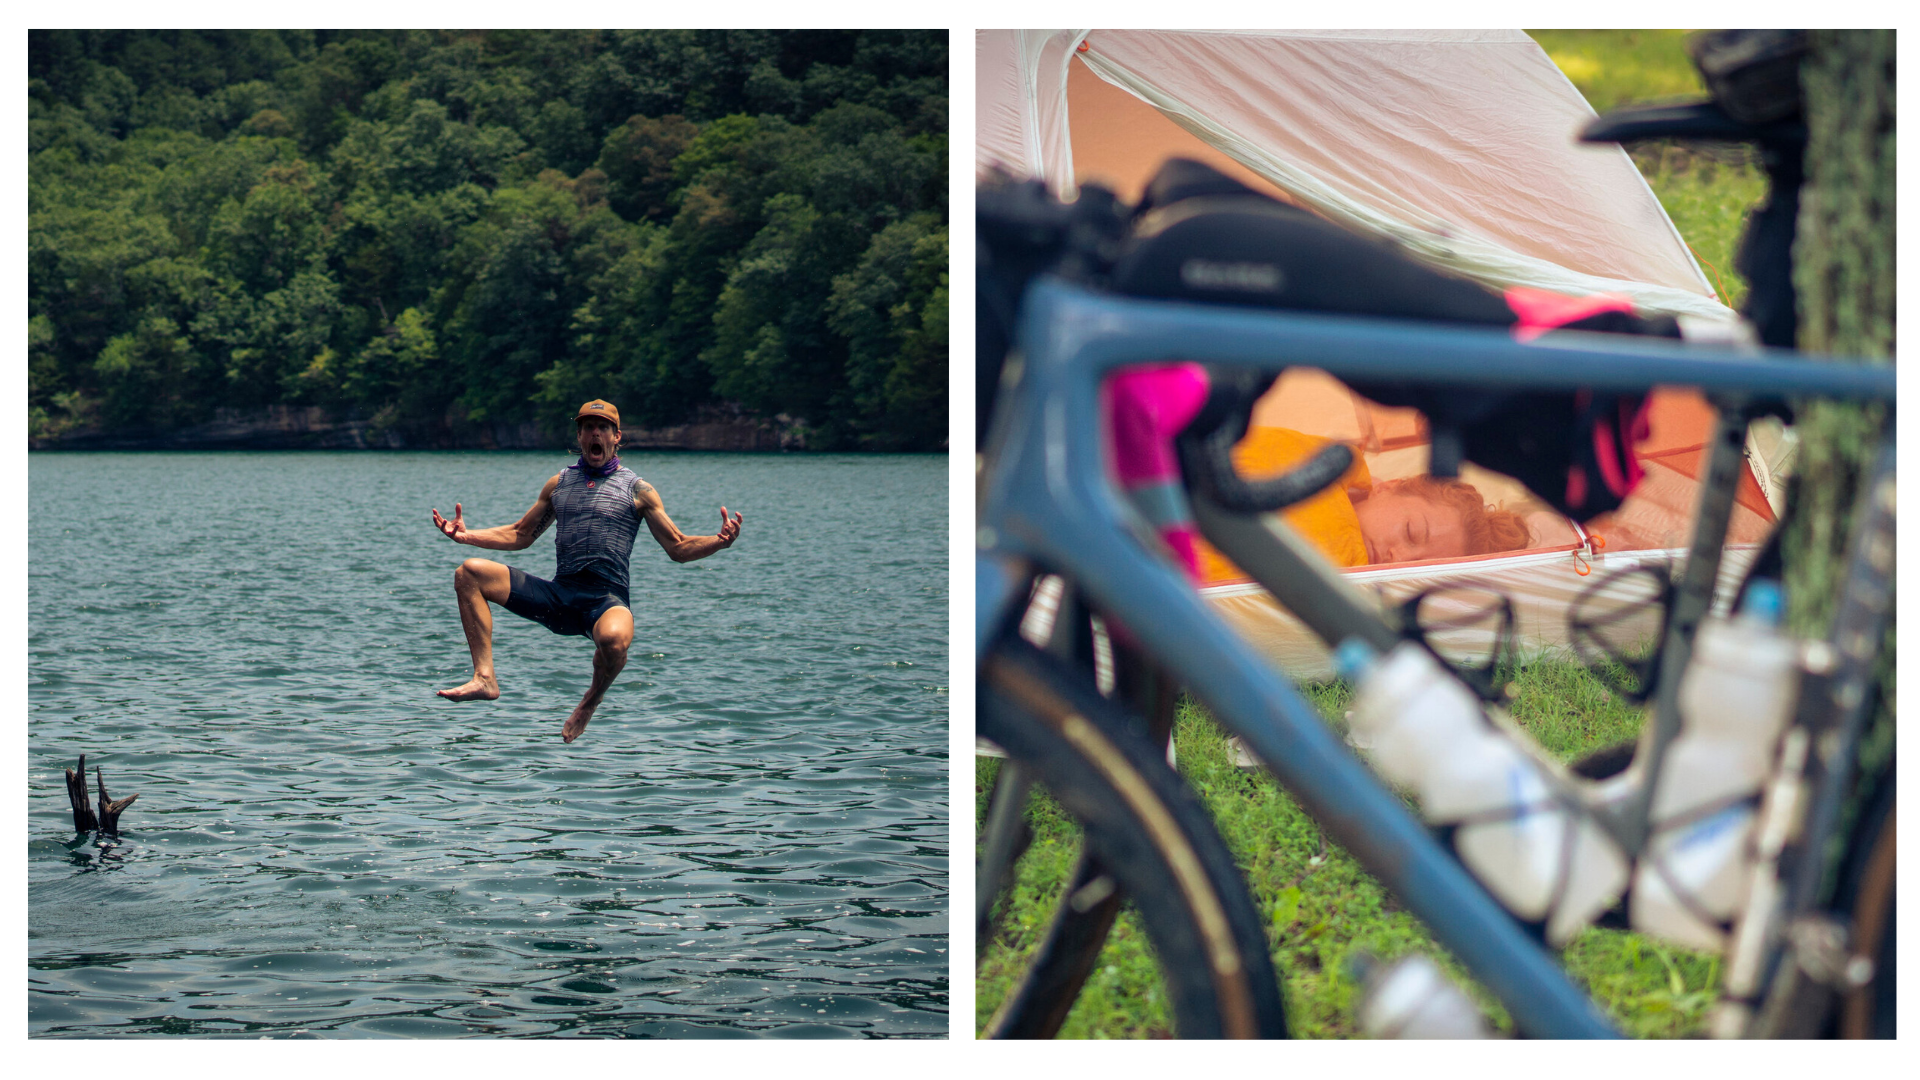 Collage of photo of a male rider jumping into the lake and a closeup shot of a bike with a woman sleeping in the tent in the background.